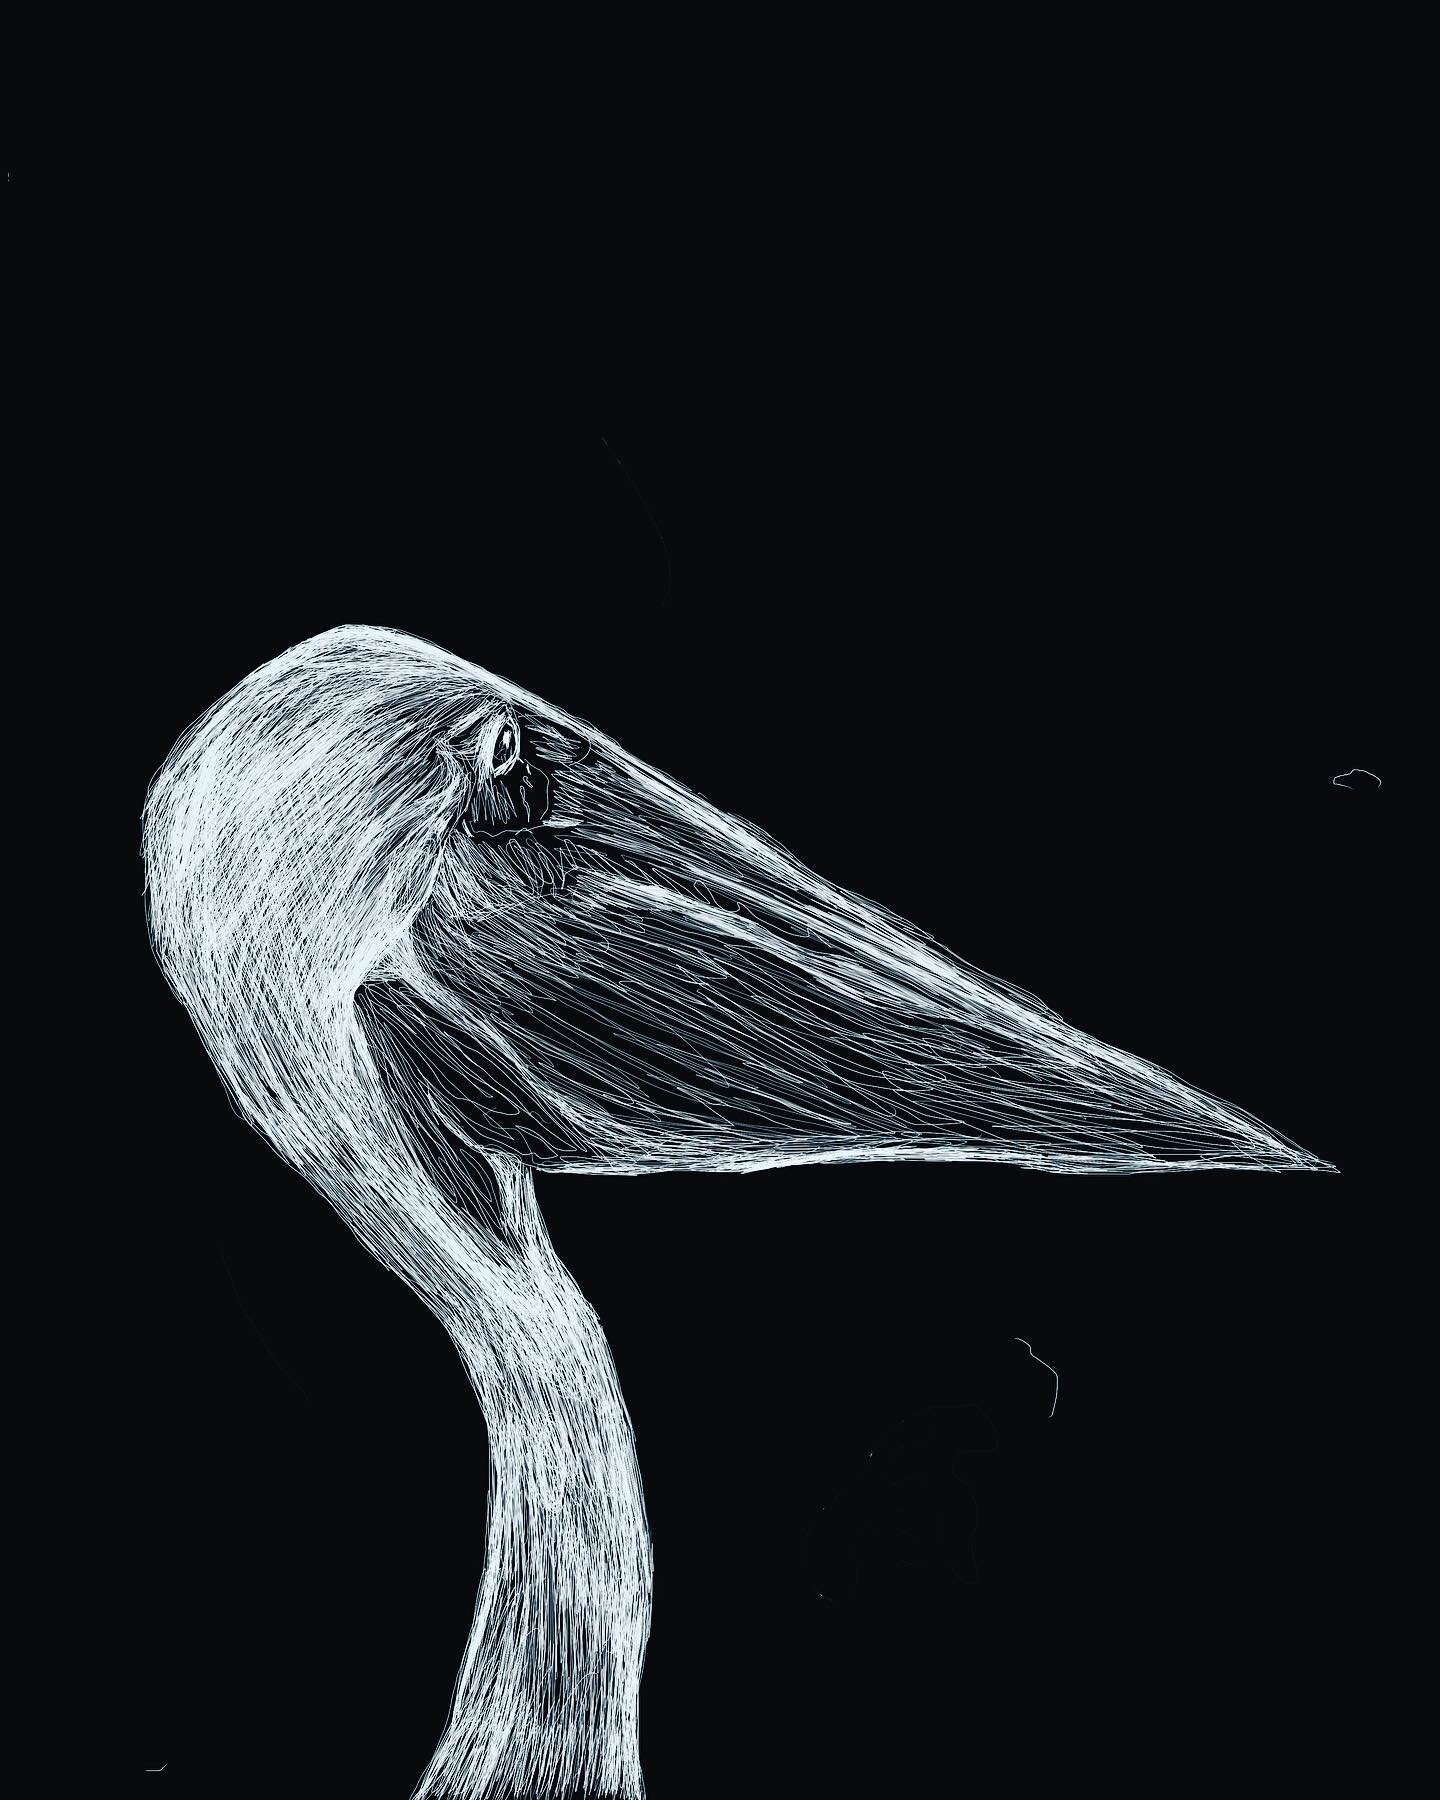 Sunday Sketches. Trying out procreate on the iPad.

#sundaysketches #sketch #drawing #pelicans #procreate #illustration #illustrationartists